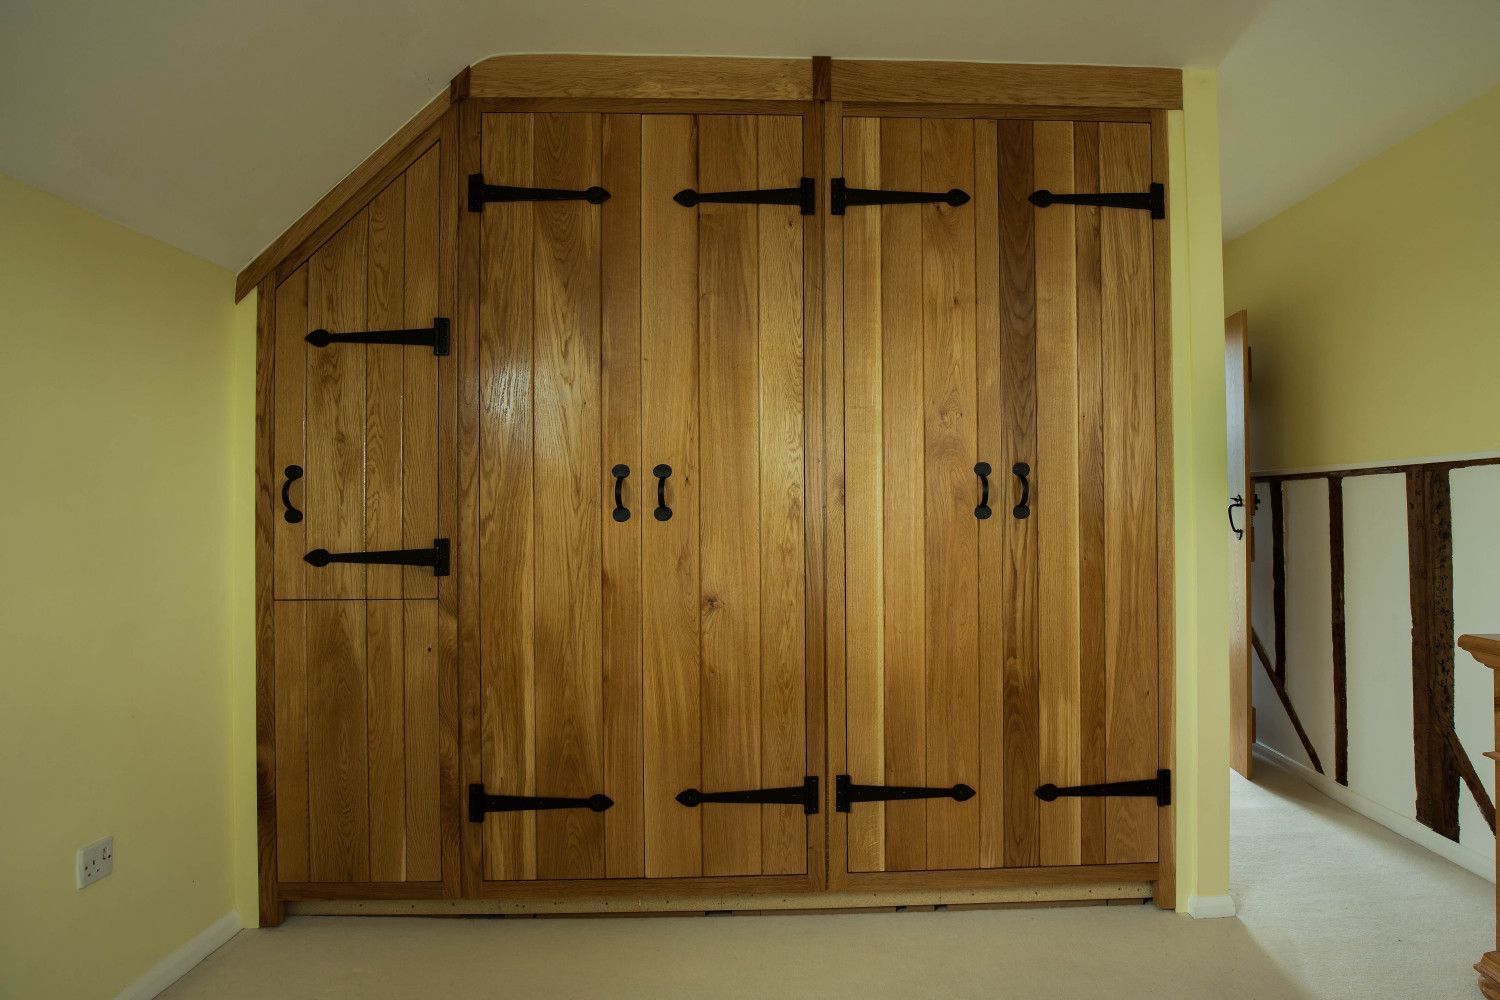 Fitted oak bespoke wardrobes, Joiners Hertfordshire -   23 rustic fitness wardrobes
 ideas